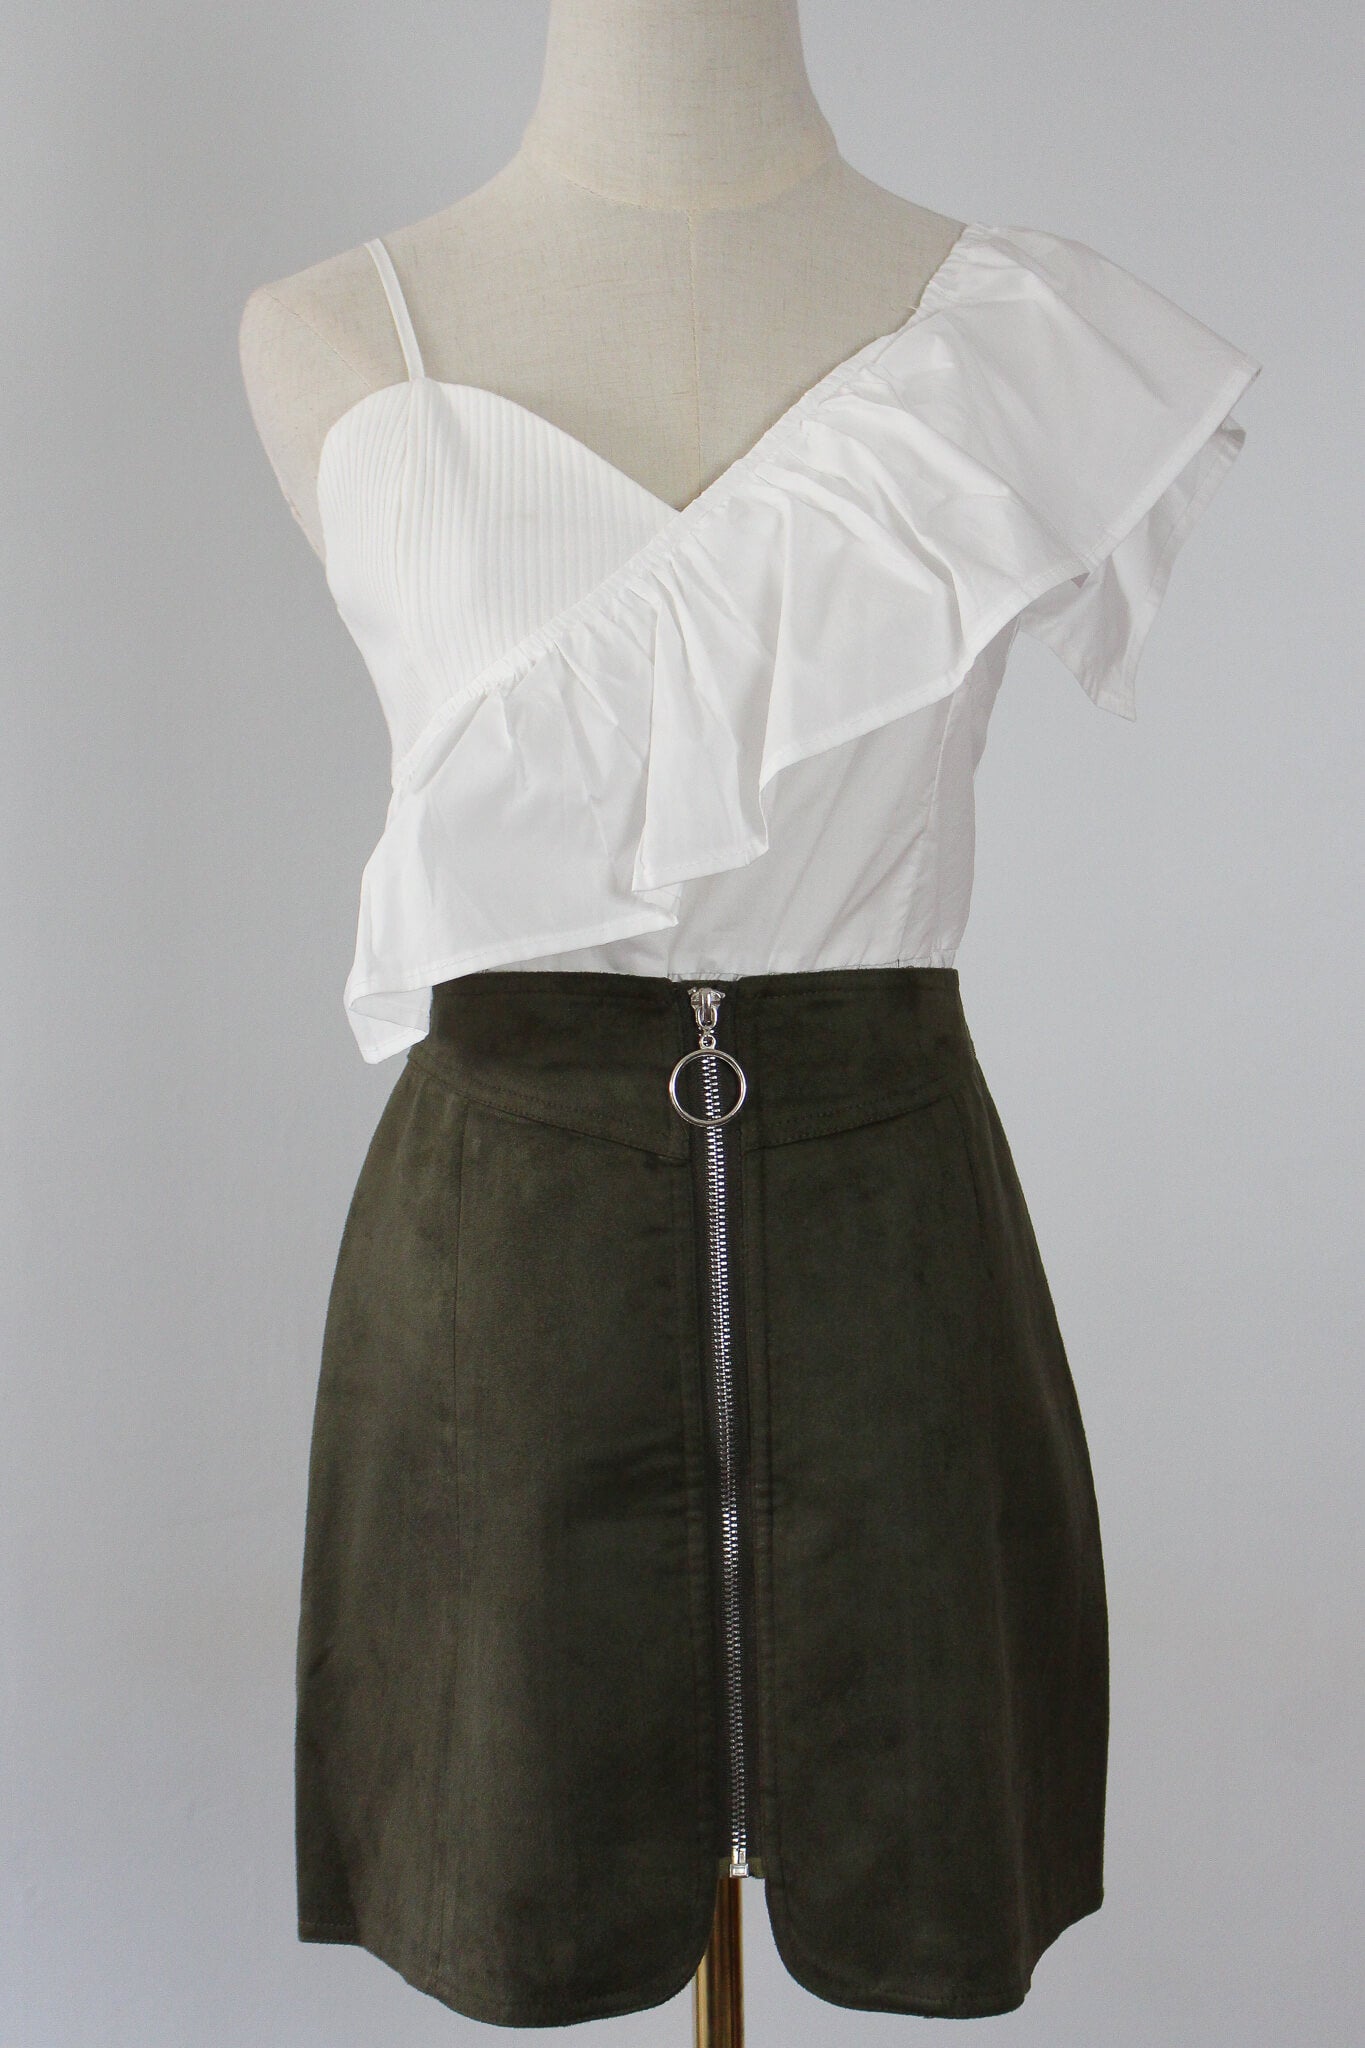 Front zipper skirt with suede like material. High waist fit